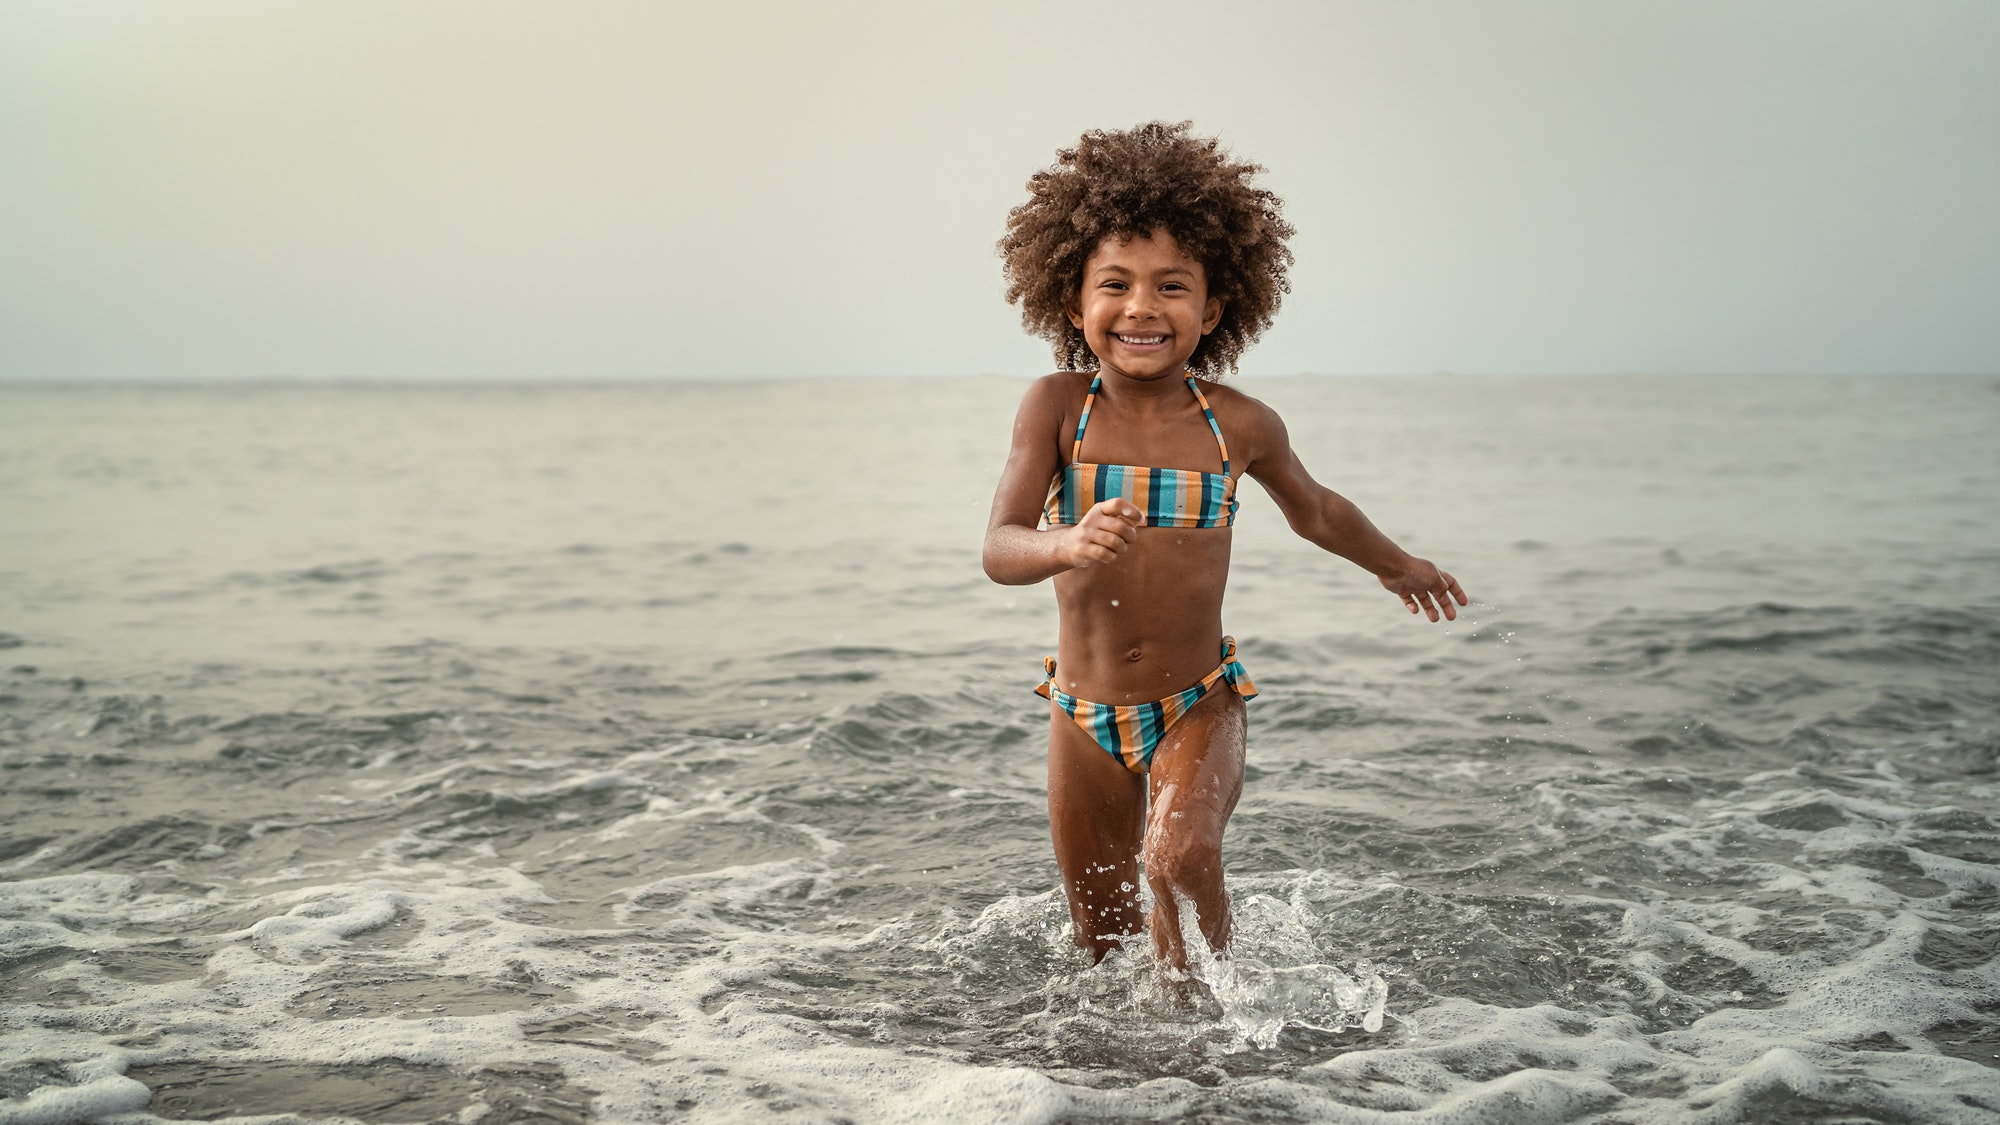 Afro child having fun playing inside sea water during summer holidays